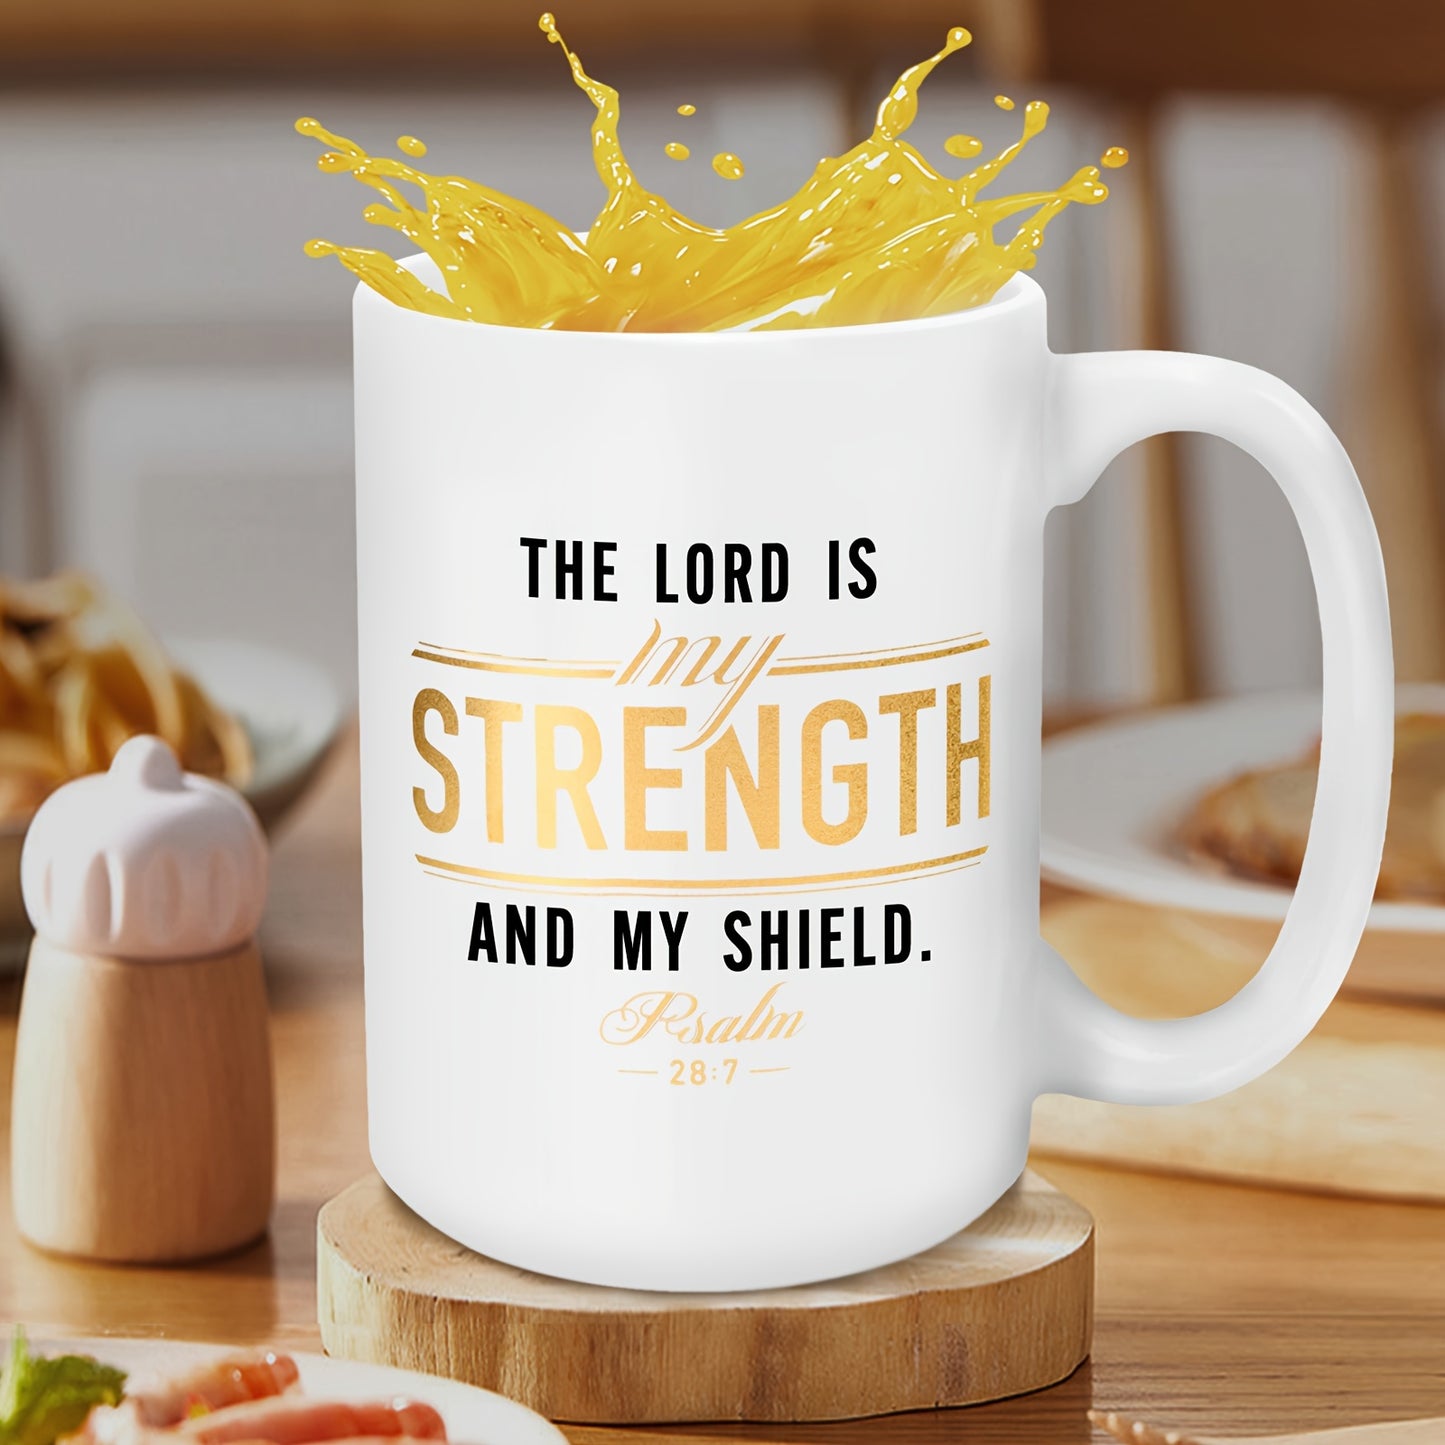 The Lord Is My Strength And My Shield Christian White Ceramic Mug 15oz claimedbygoddesigns